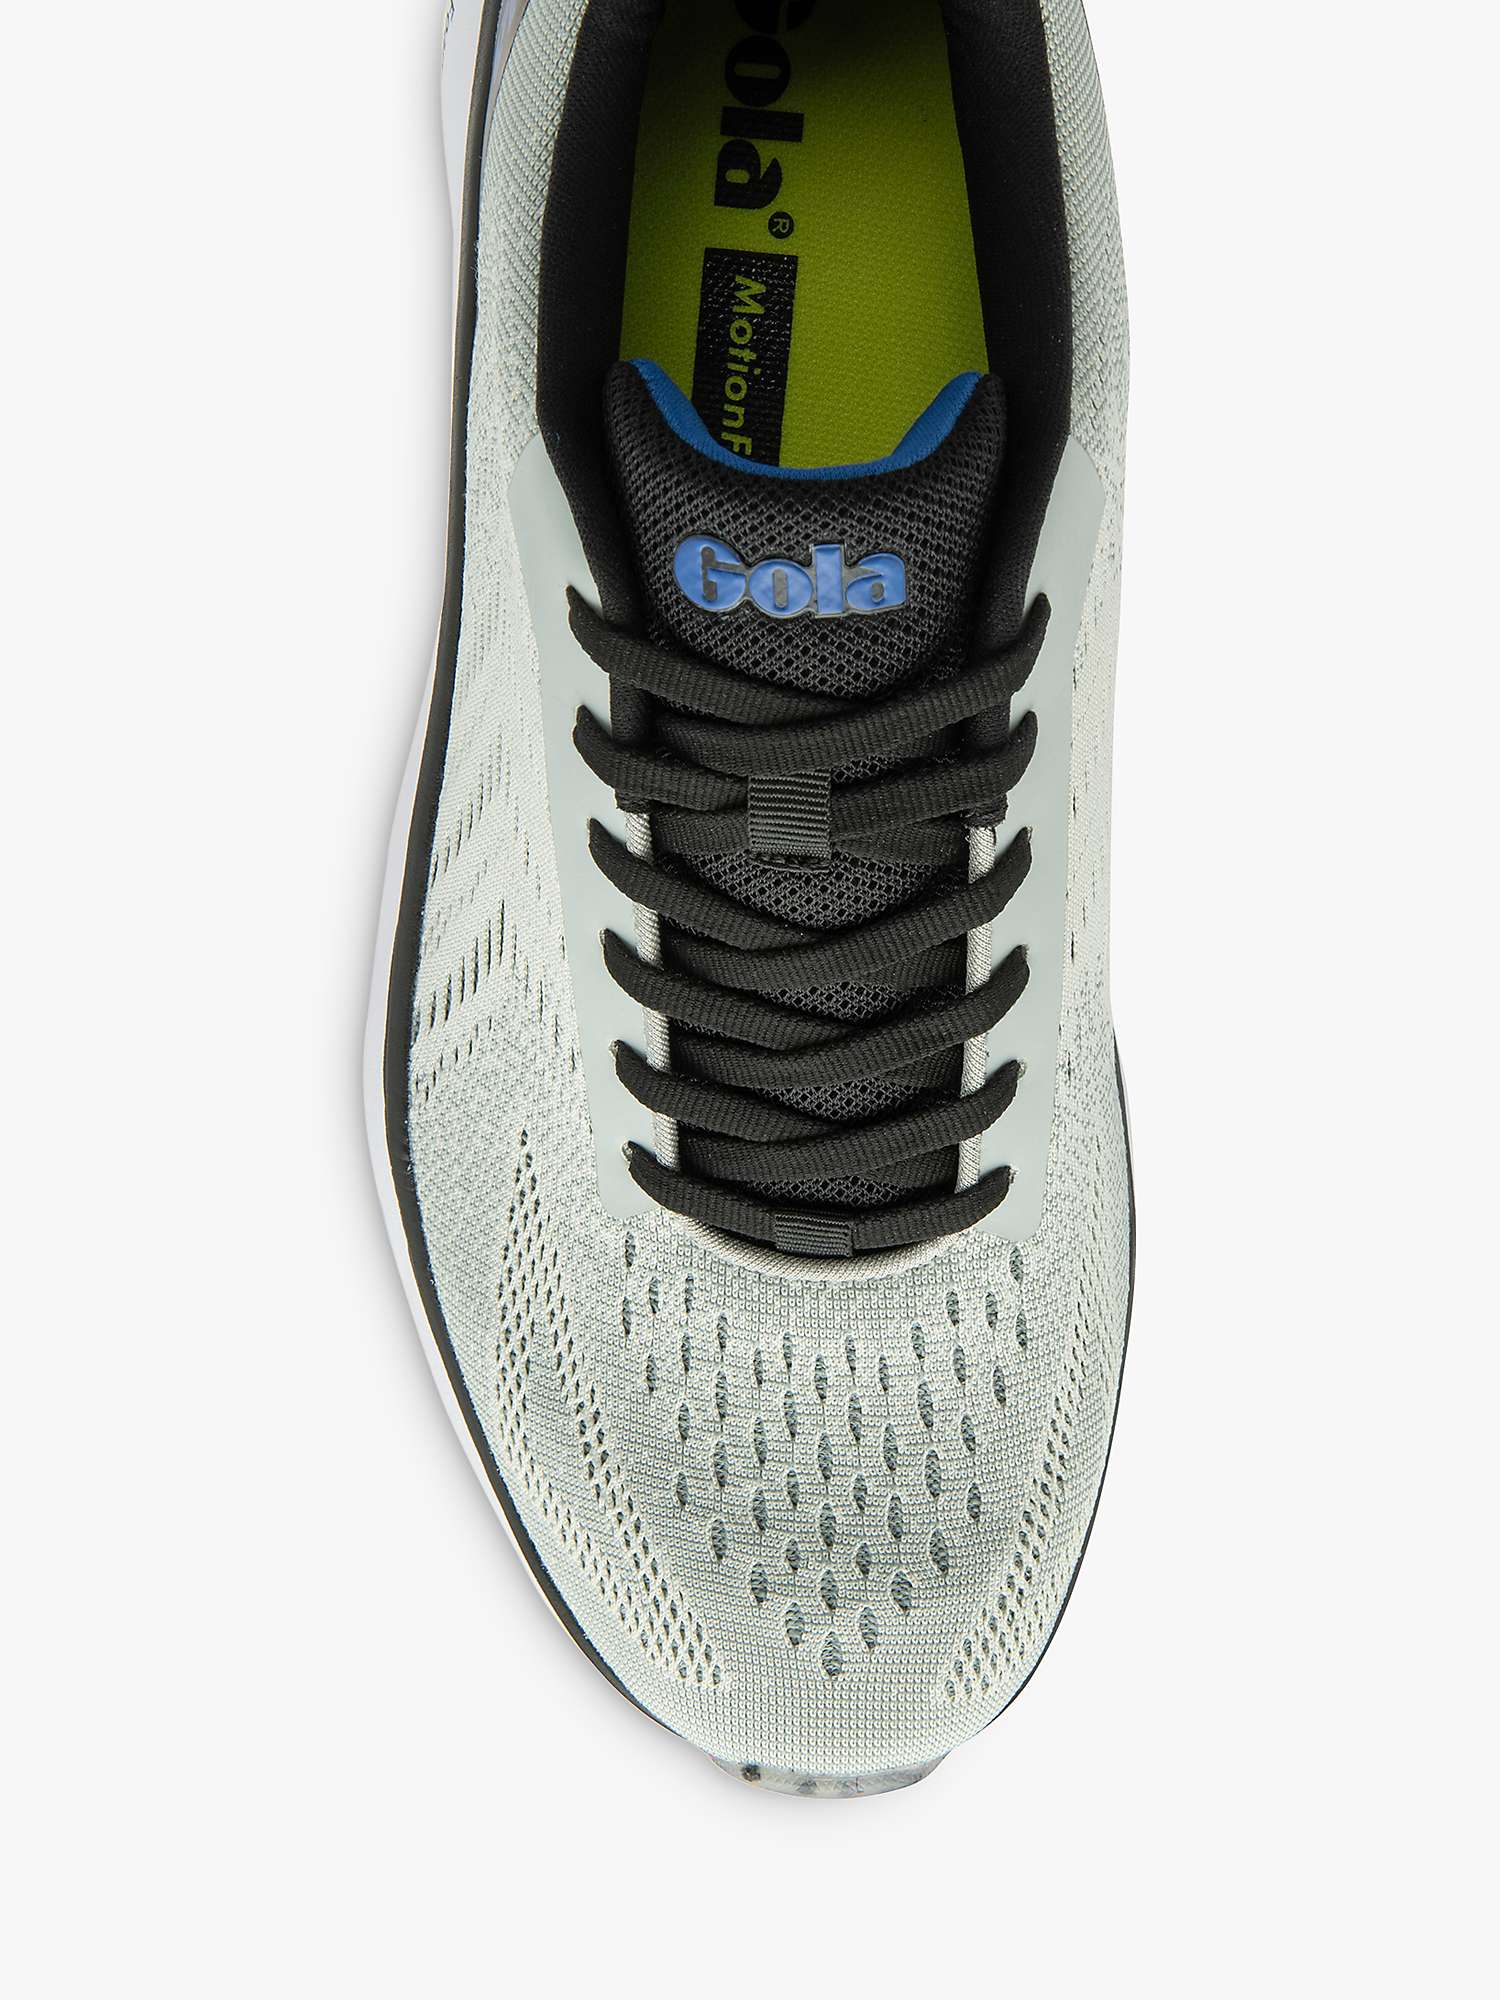 Buy Gola Performance Ultra Speed 2 Running Trainers, Grey/Black/Pro Blue Online at johnlewis.com